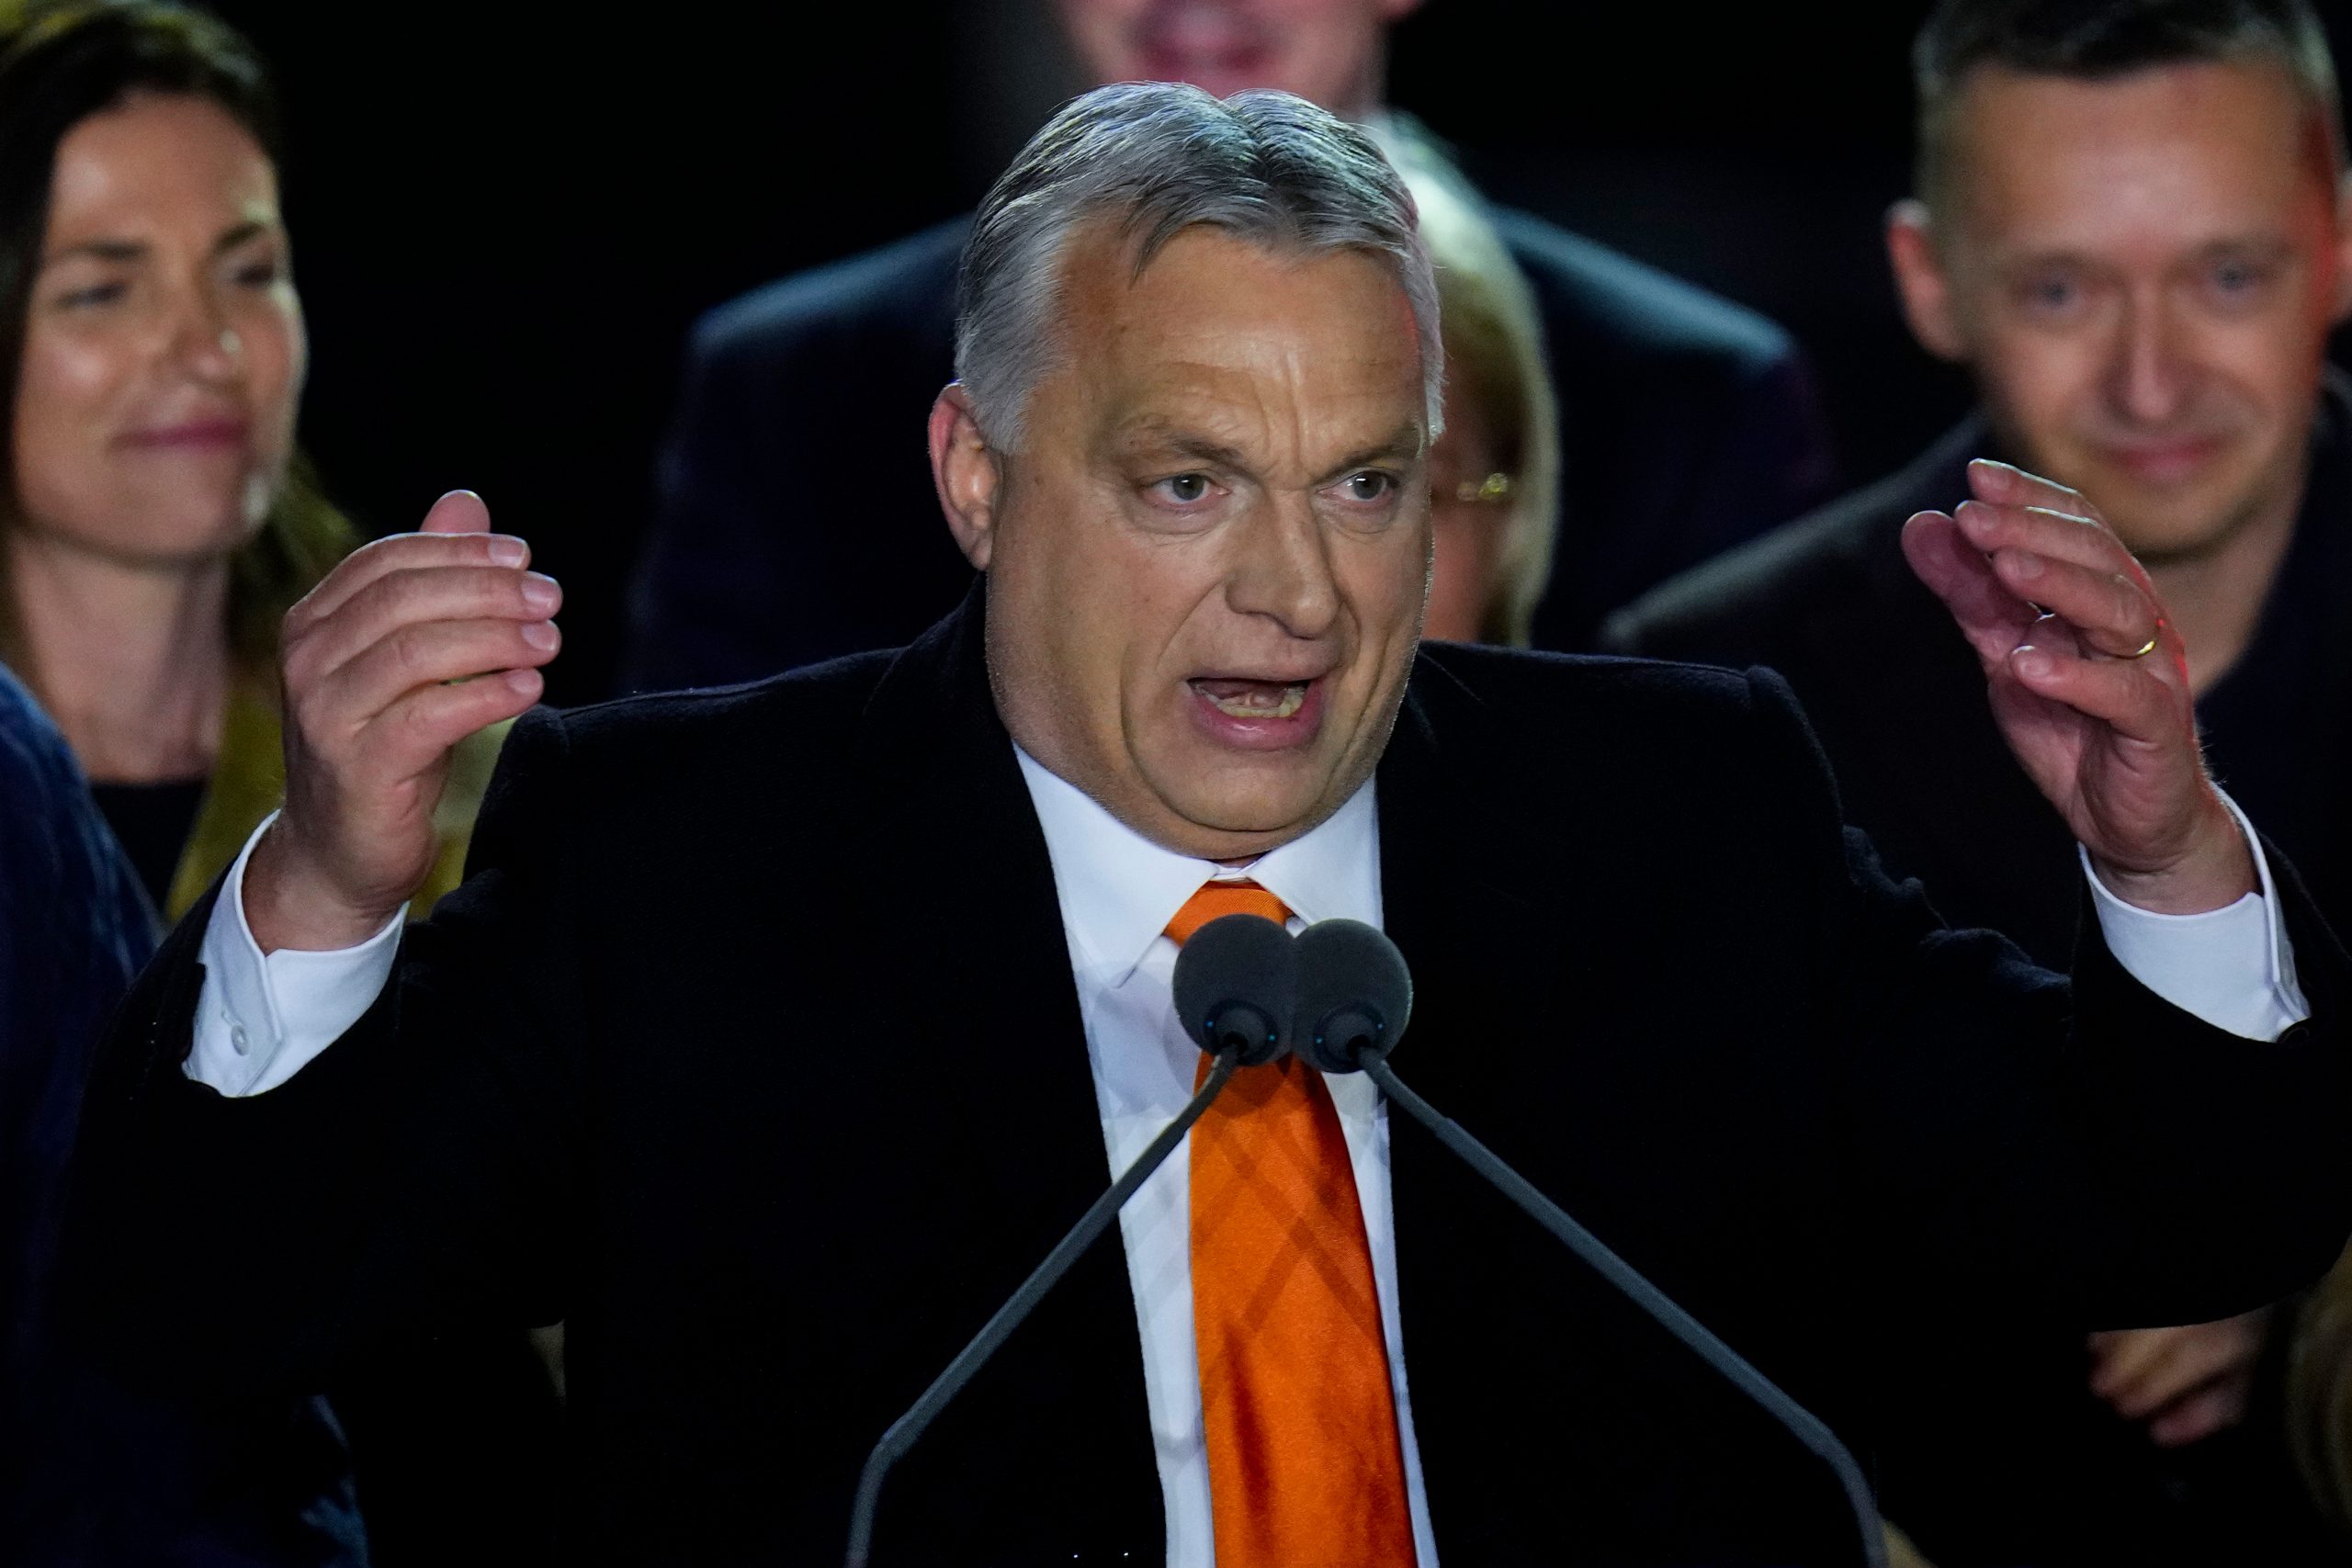 Hungary’s pro-Putin PM Viktor Orban claims victory in national vote